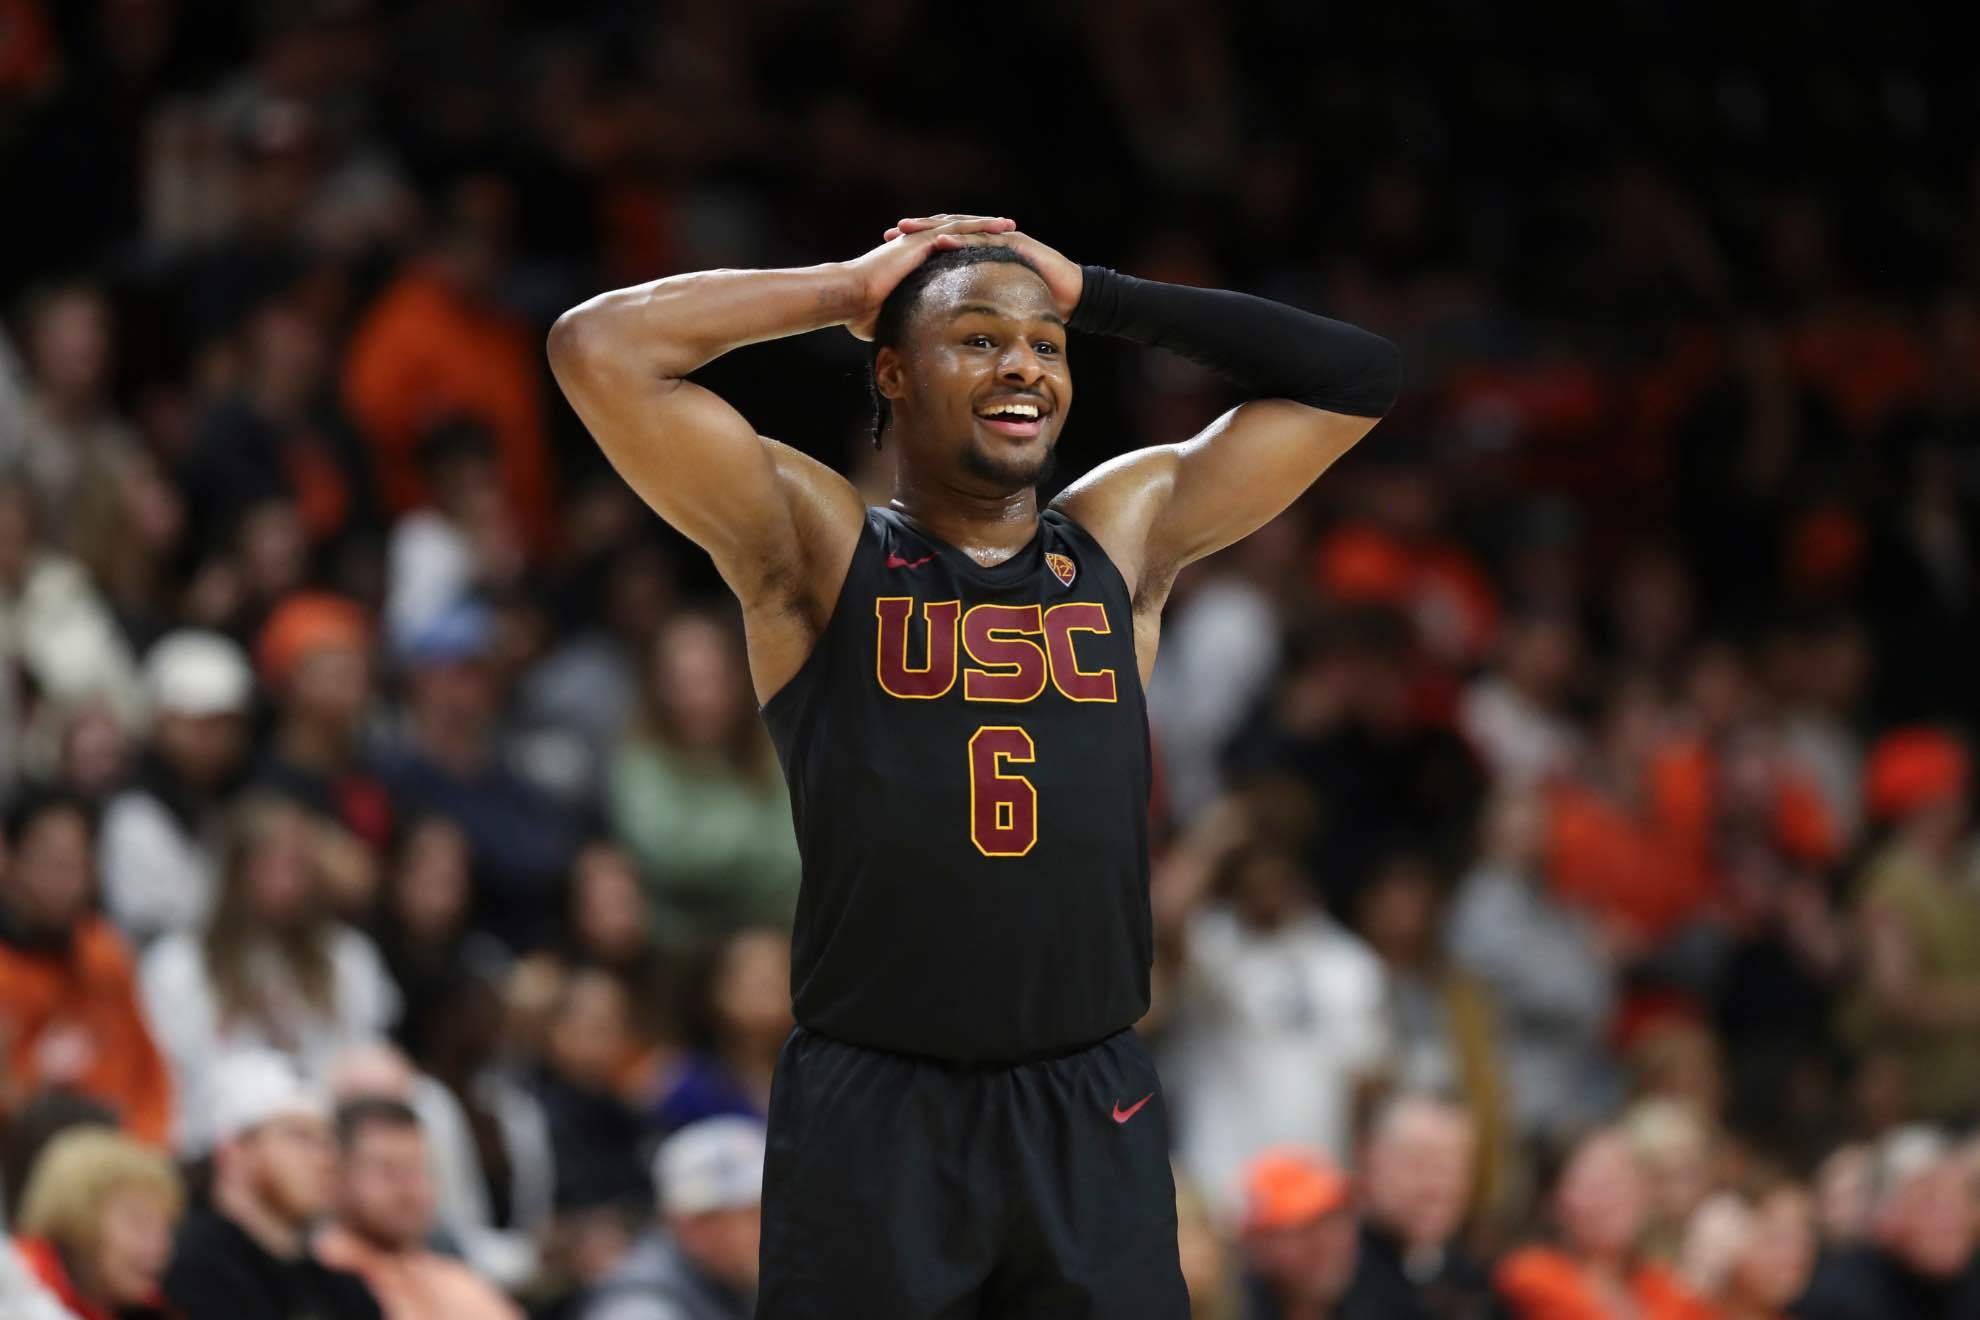 Bronny James has produced jaw dropping plays for USC